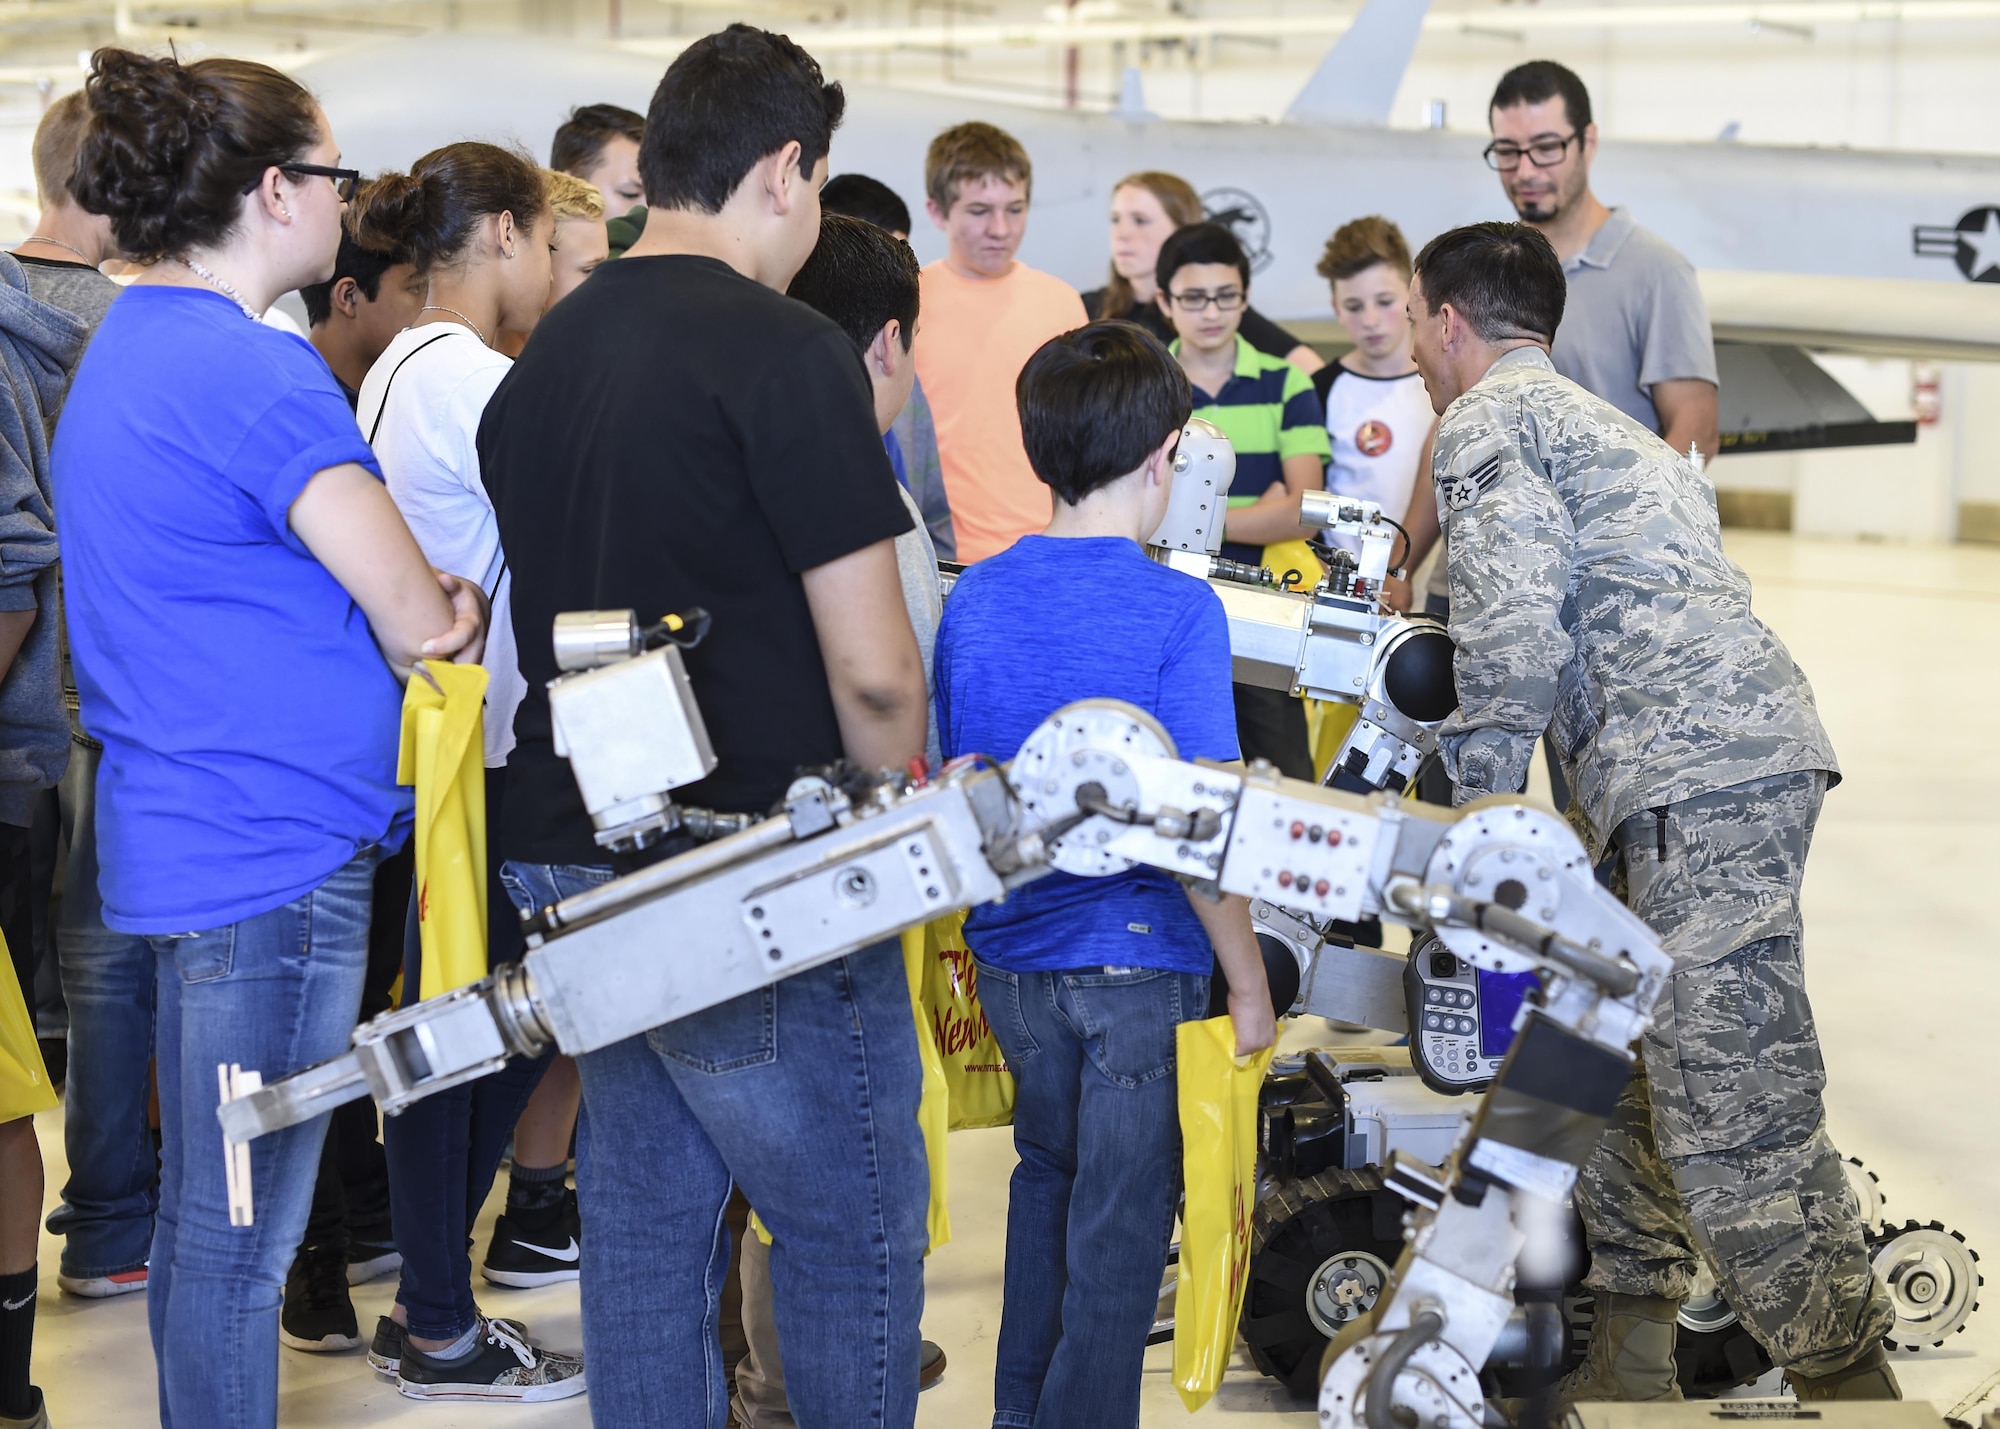 Senior Airman Kevin Oseguera Explosive Ordnance Disposal technician with 49th Civil Engineer squadron demonstrates how what a bomb disposal robot is used for during the fourth annual New Mexico Aviation Aerospace Association Career Expo Oct. 6, 2016 at Holloman Air Force Base N.M. About 2,500 middle school through college-level students from across New Mexico came out to learn about the science, technology, engineering and mathematics fields. The goal of STEM is to motivate and educate students by giving them a taste of what aviation and aerospace engineering is all about. These STEM events also get the students talking to people who are working directly in STEM industries.  (U.S. Air Force photo by Staff Sgt. Stacy Jonsgaard